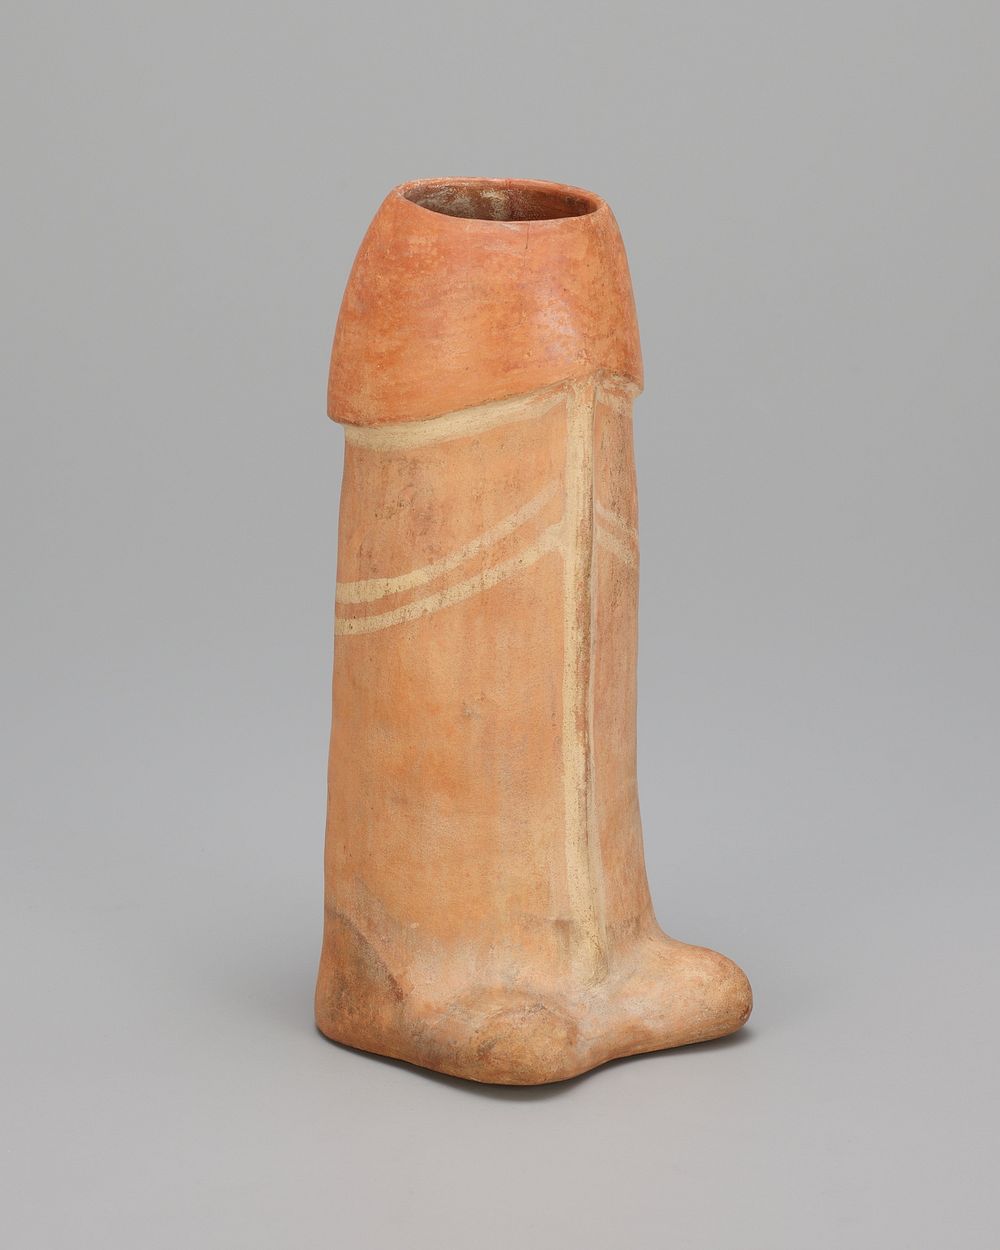 Jar in the Form of a Phallus by Moche